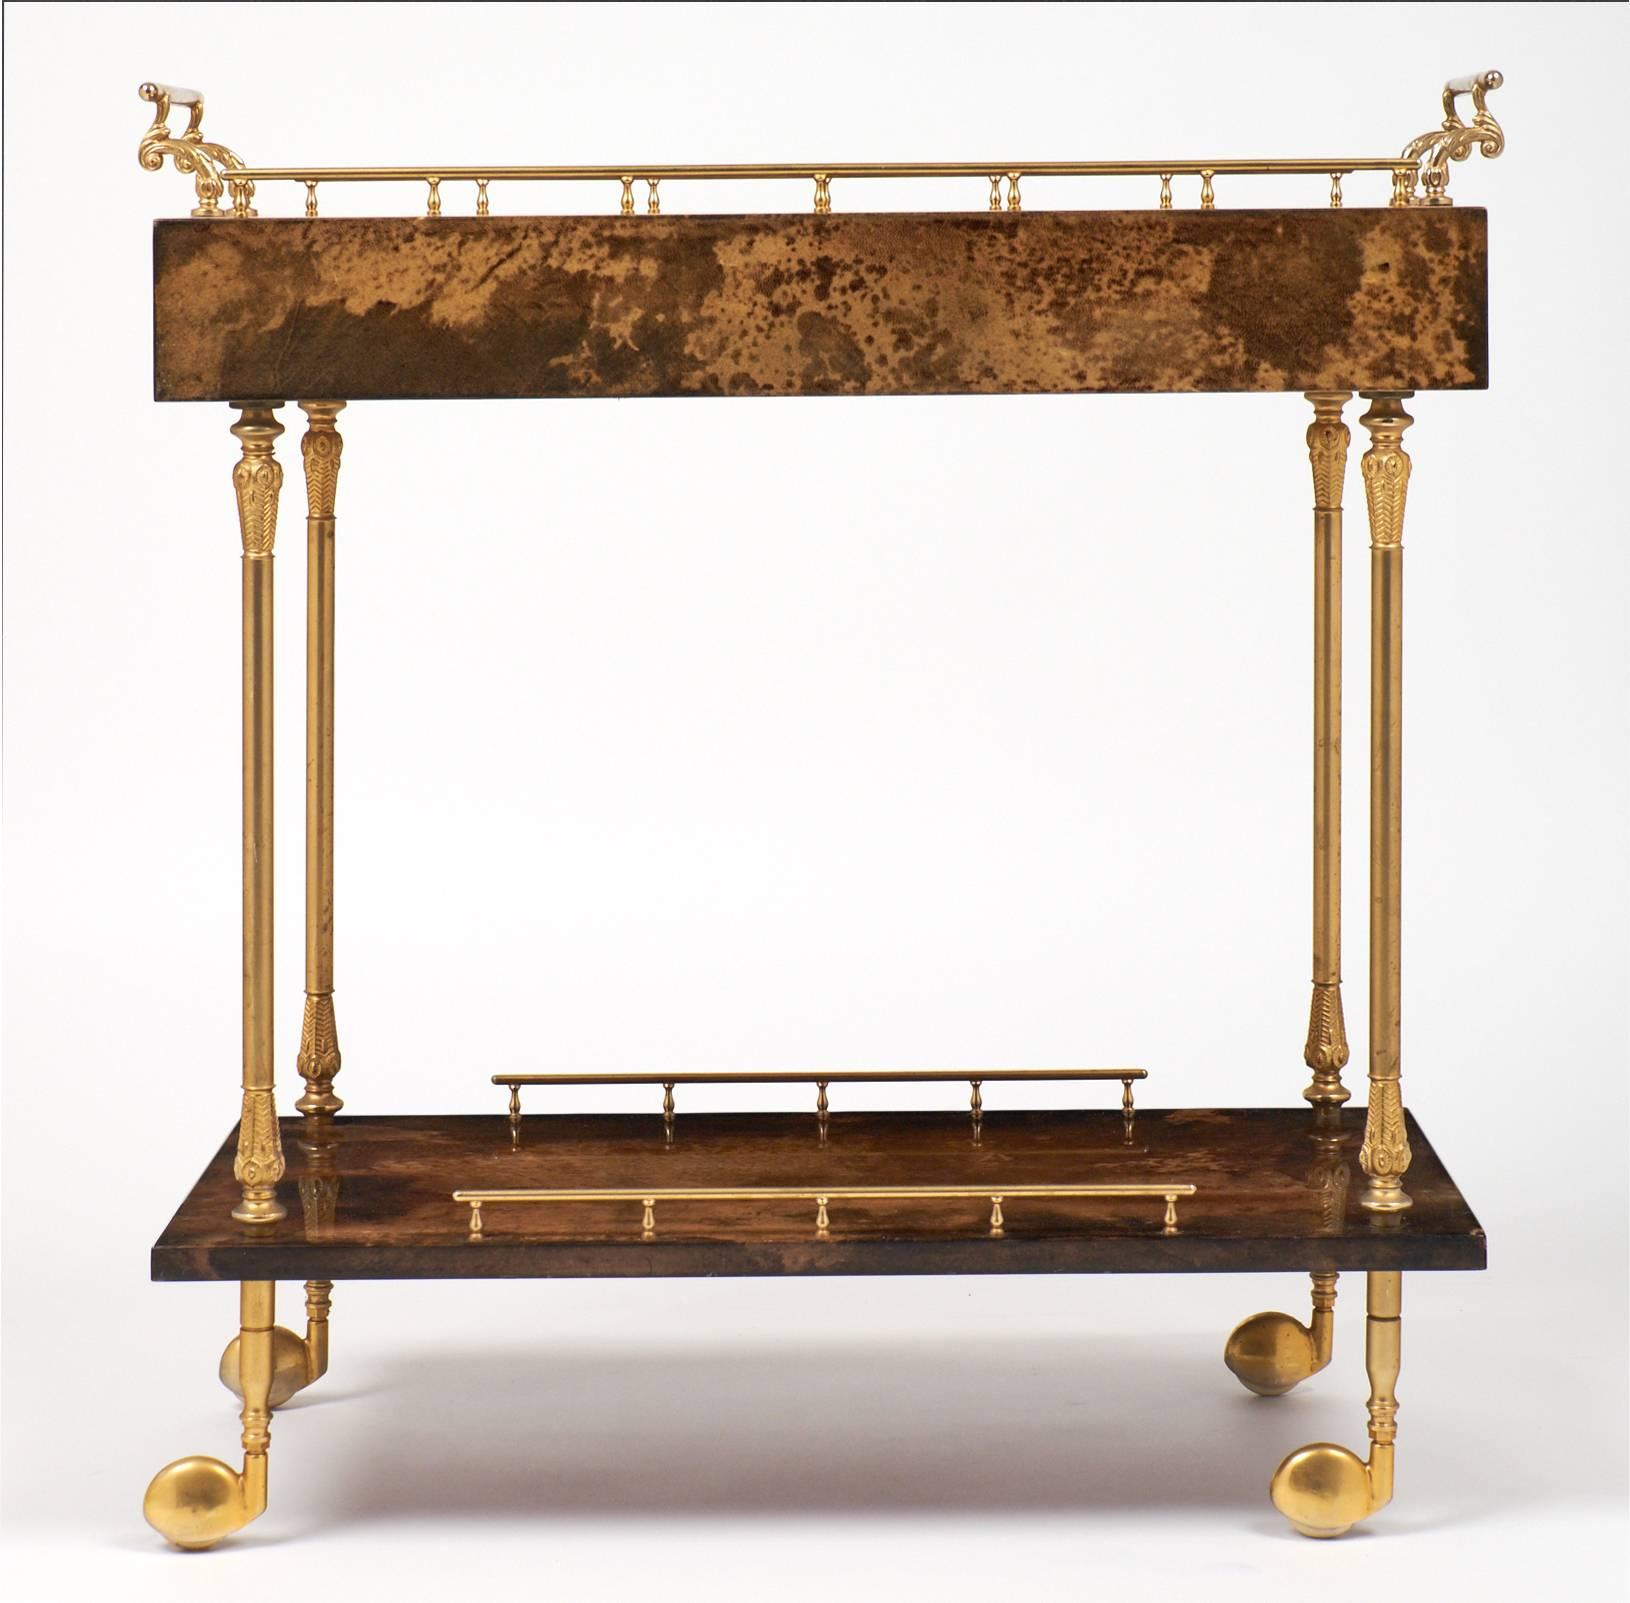 French vintage bar cart with two levels cased in lacquered goat skin with gilt brass handles and legs, on casters. A dovetailed drawer on each side will hold barware and serving supplies.